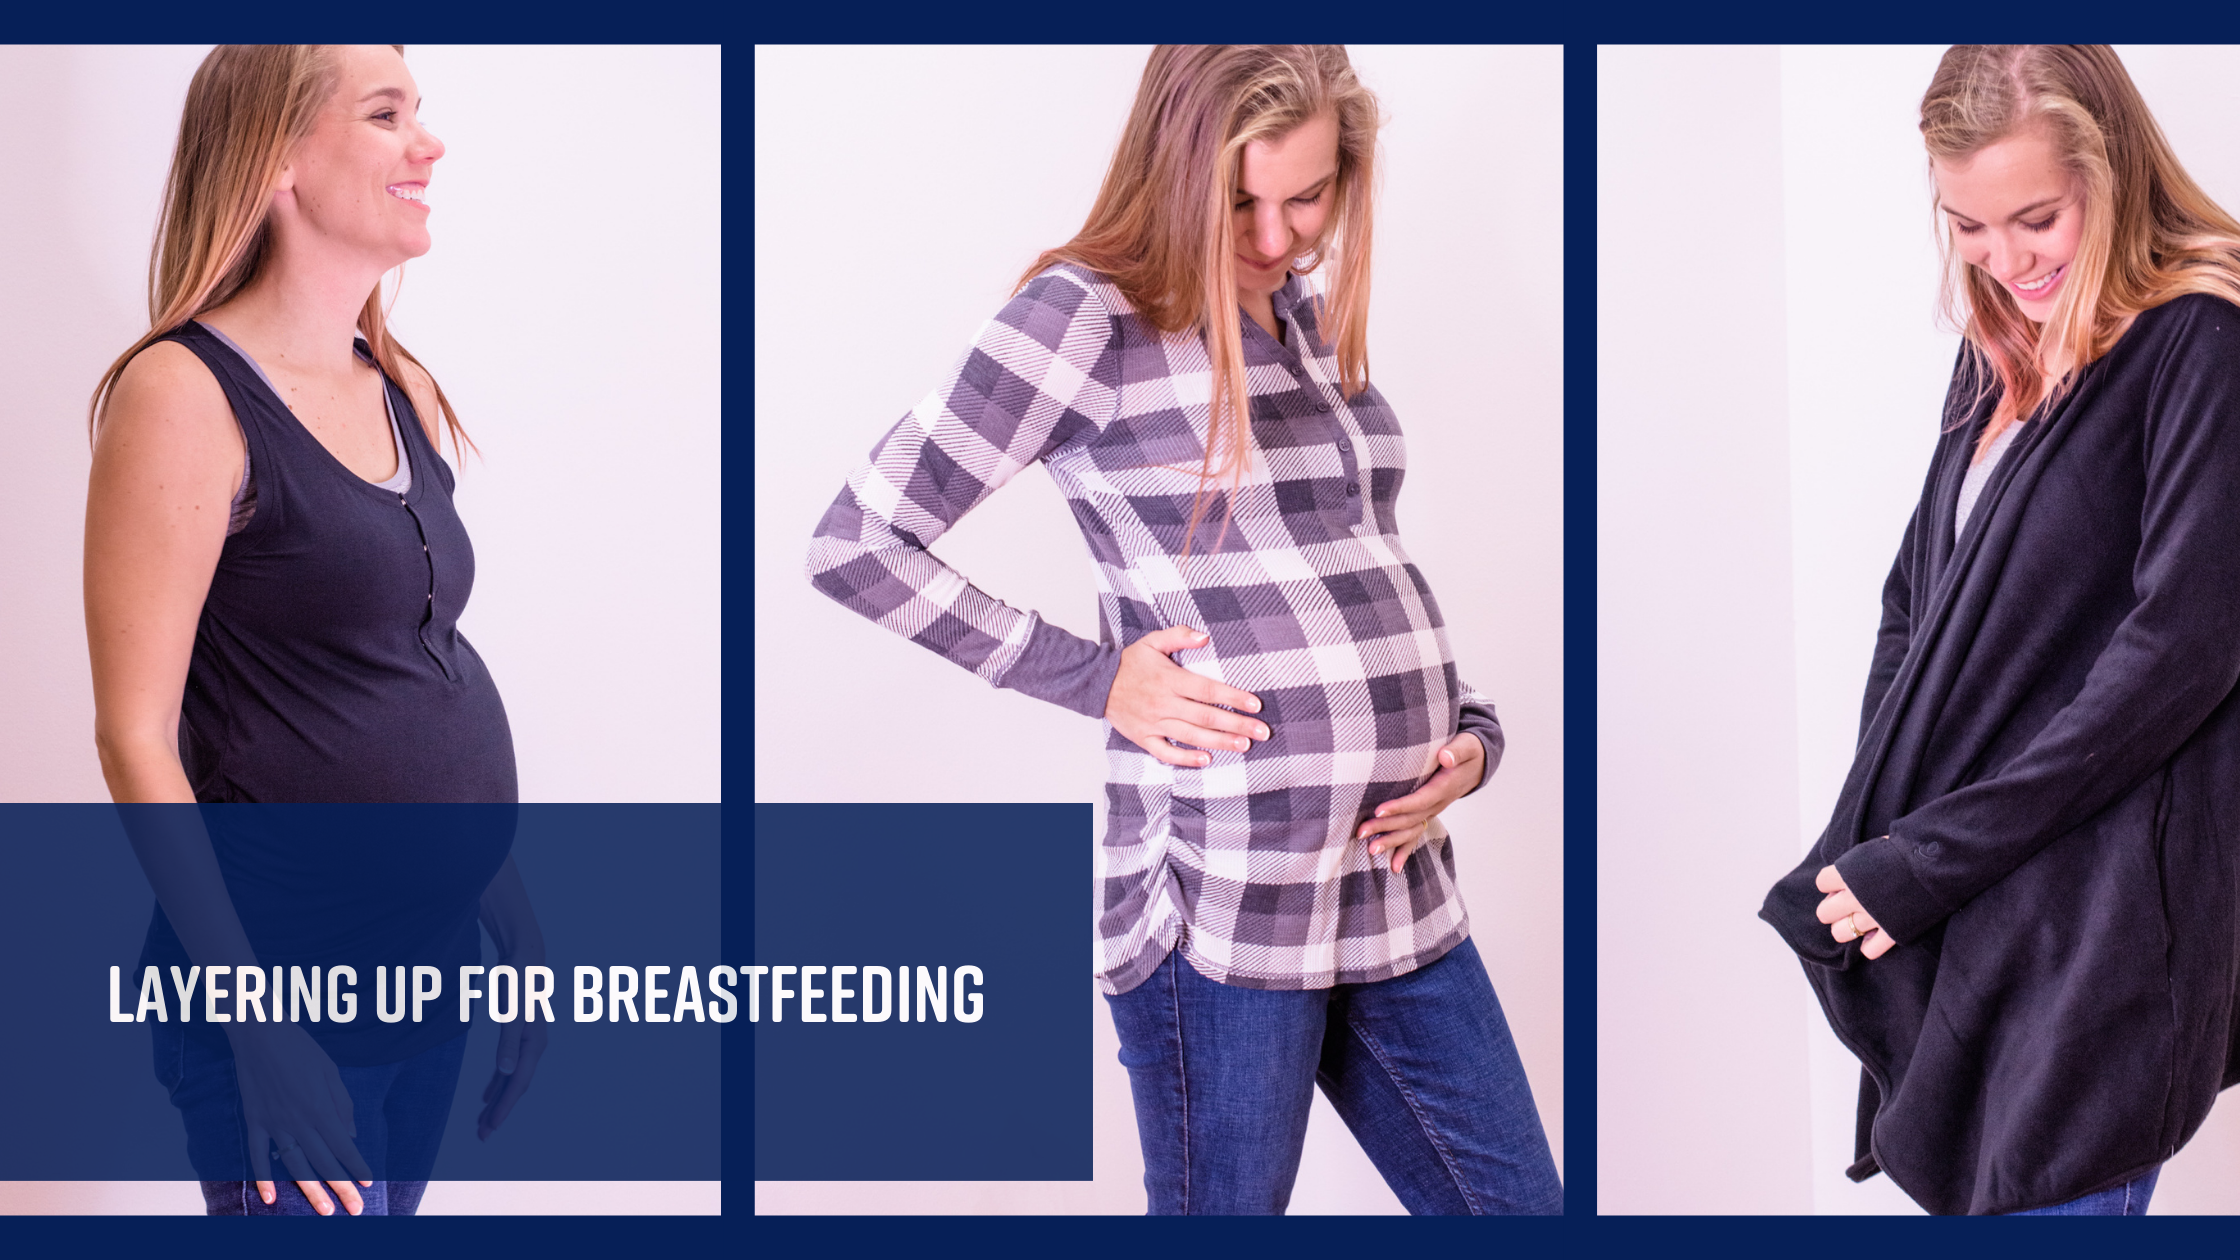 Layering Up for Breastfeeding